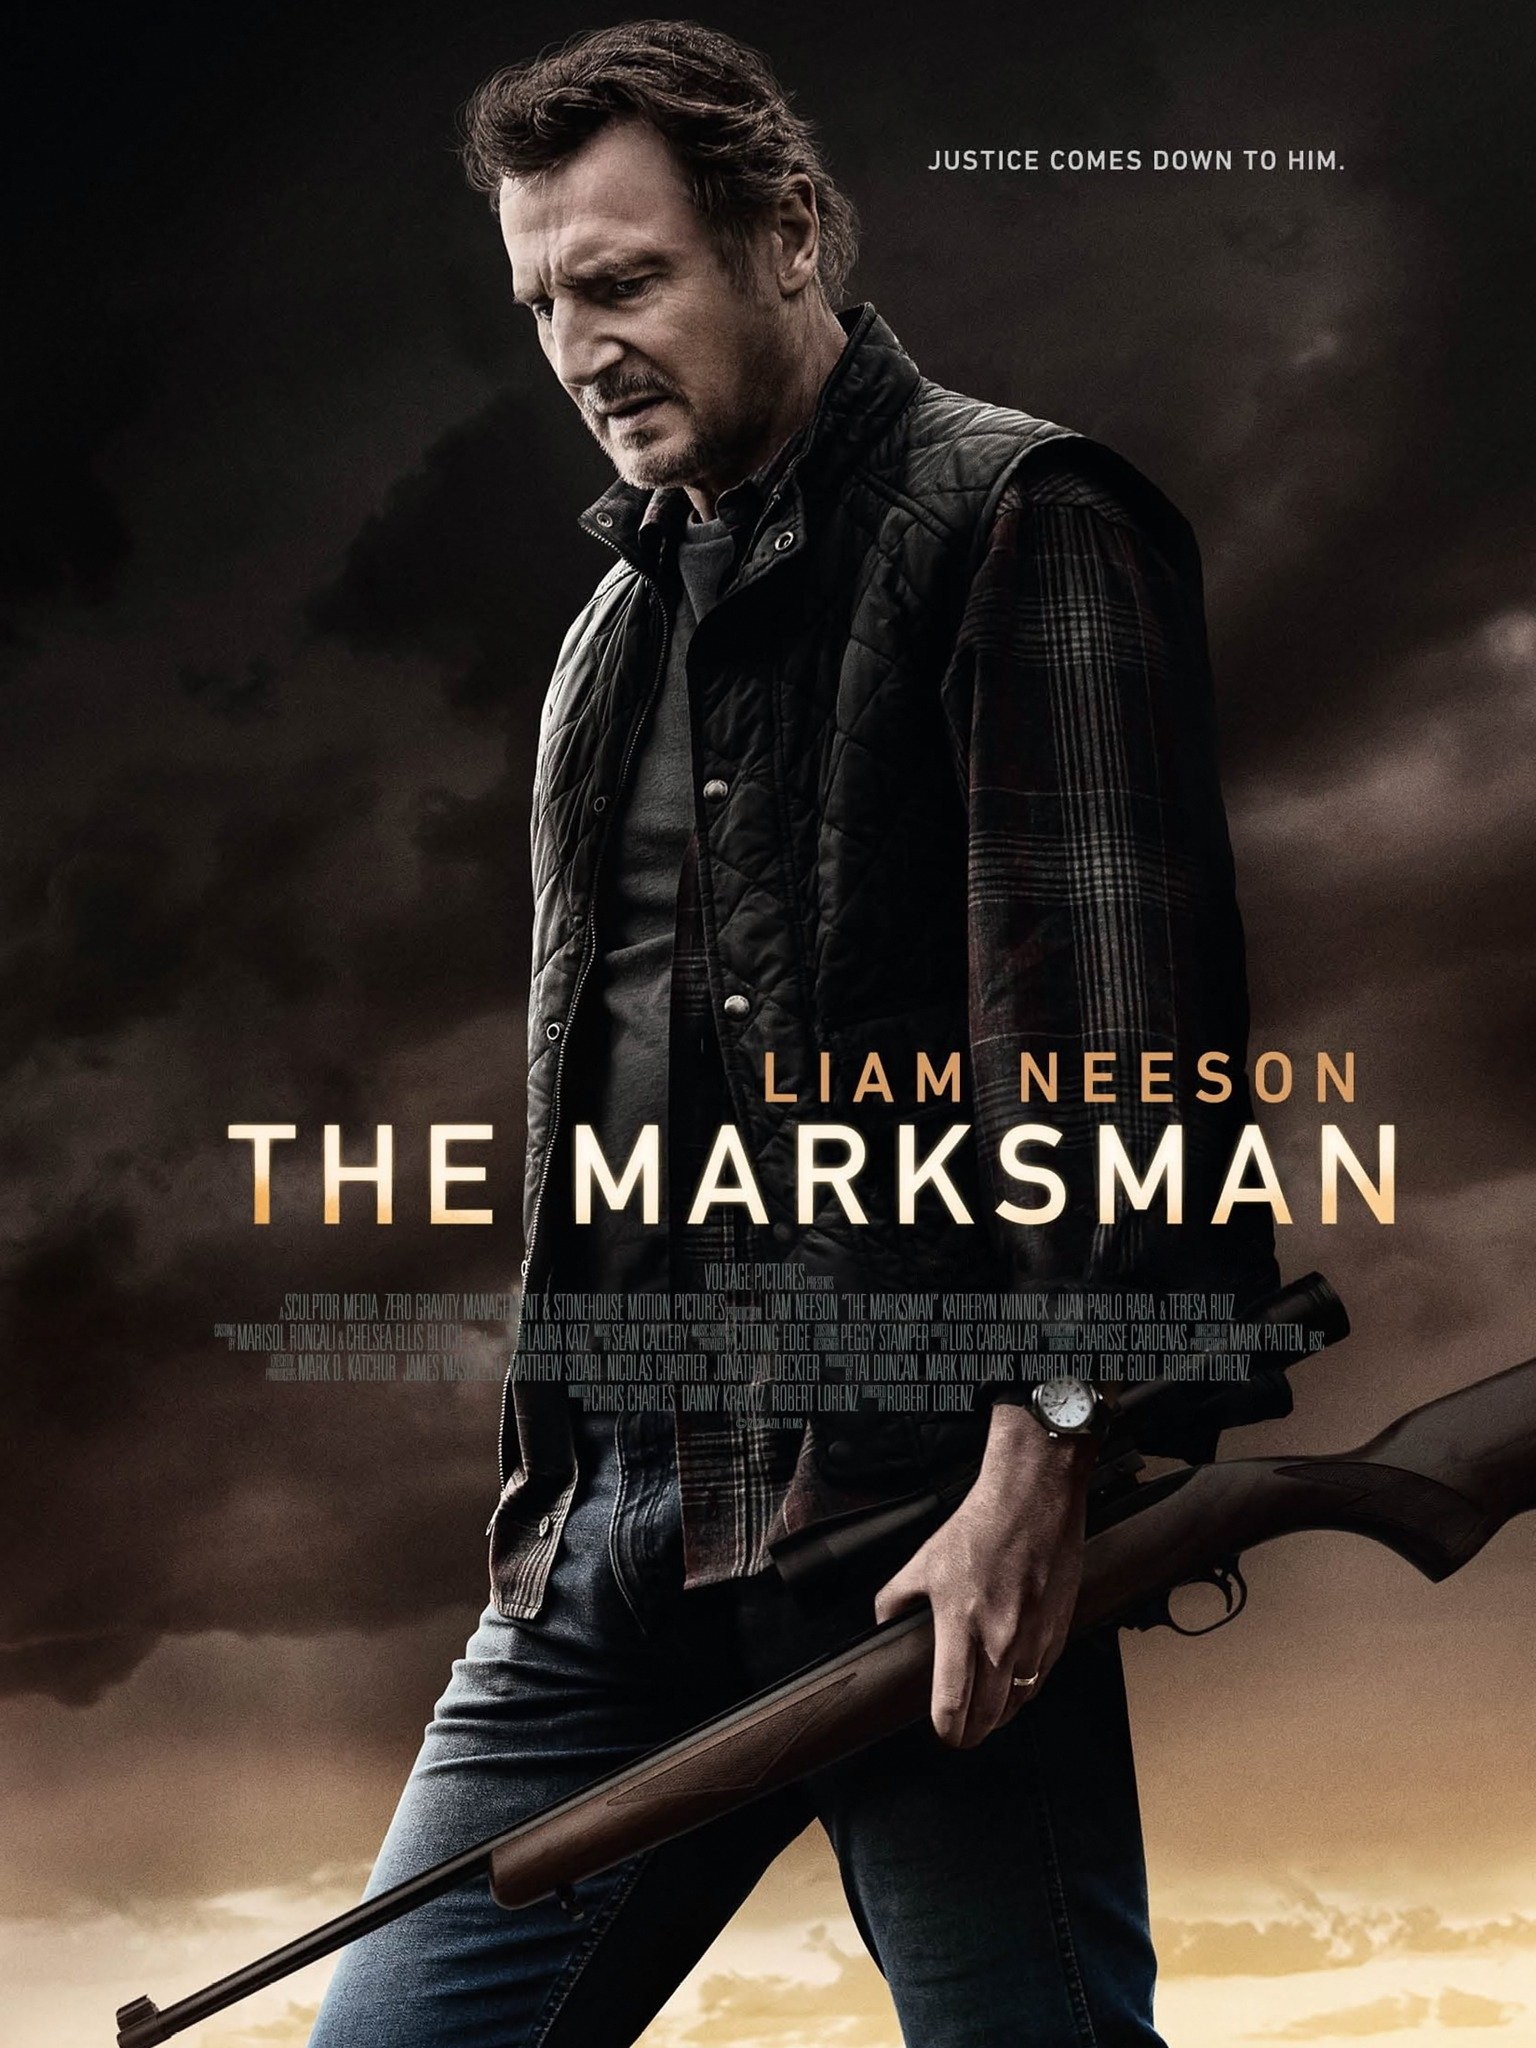 The Marksman | Watch Page | DVD, Blu-ray, Digital HD, On Demand, Trailers,  Downloads | Universal Pictures Home Entertainment